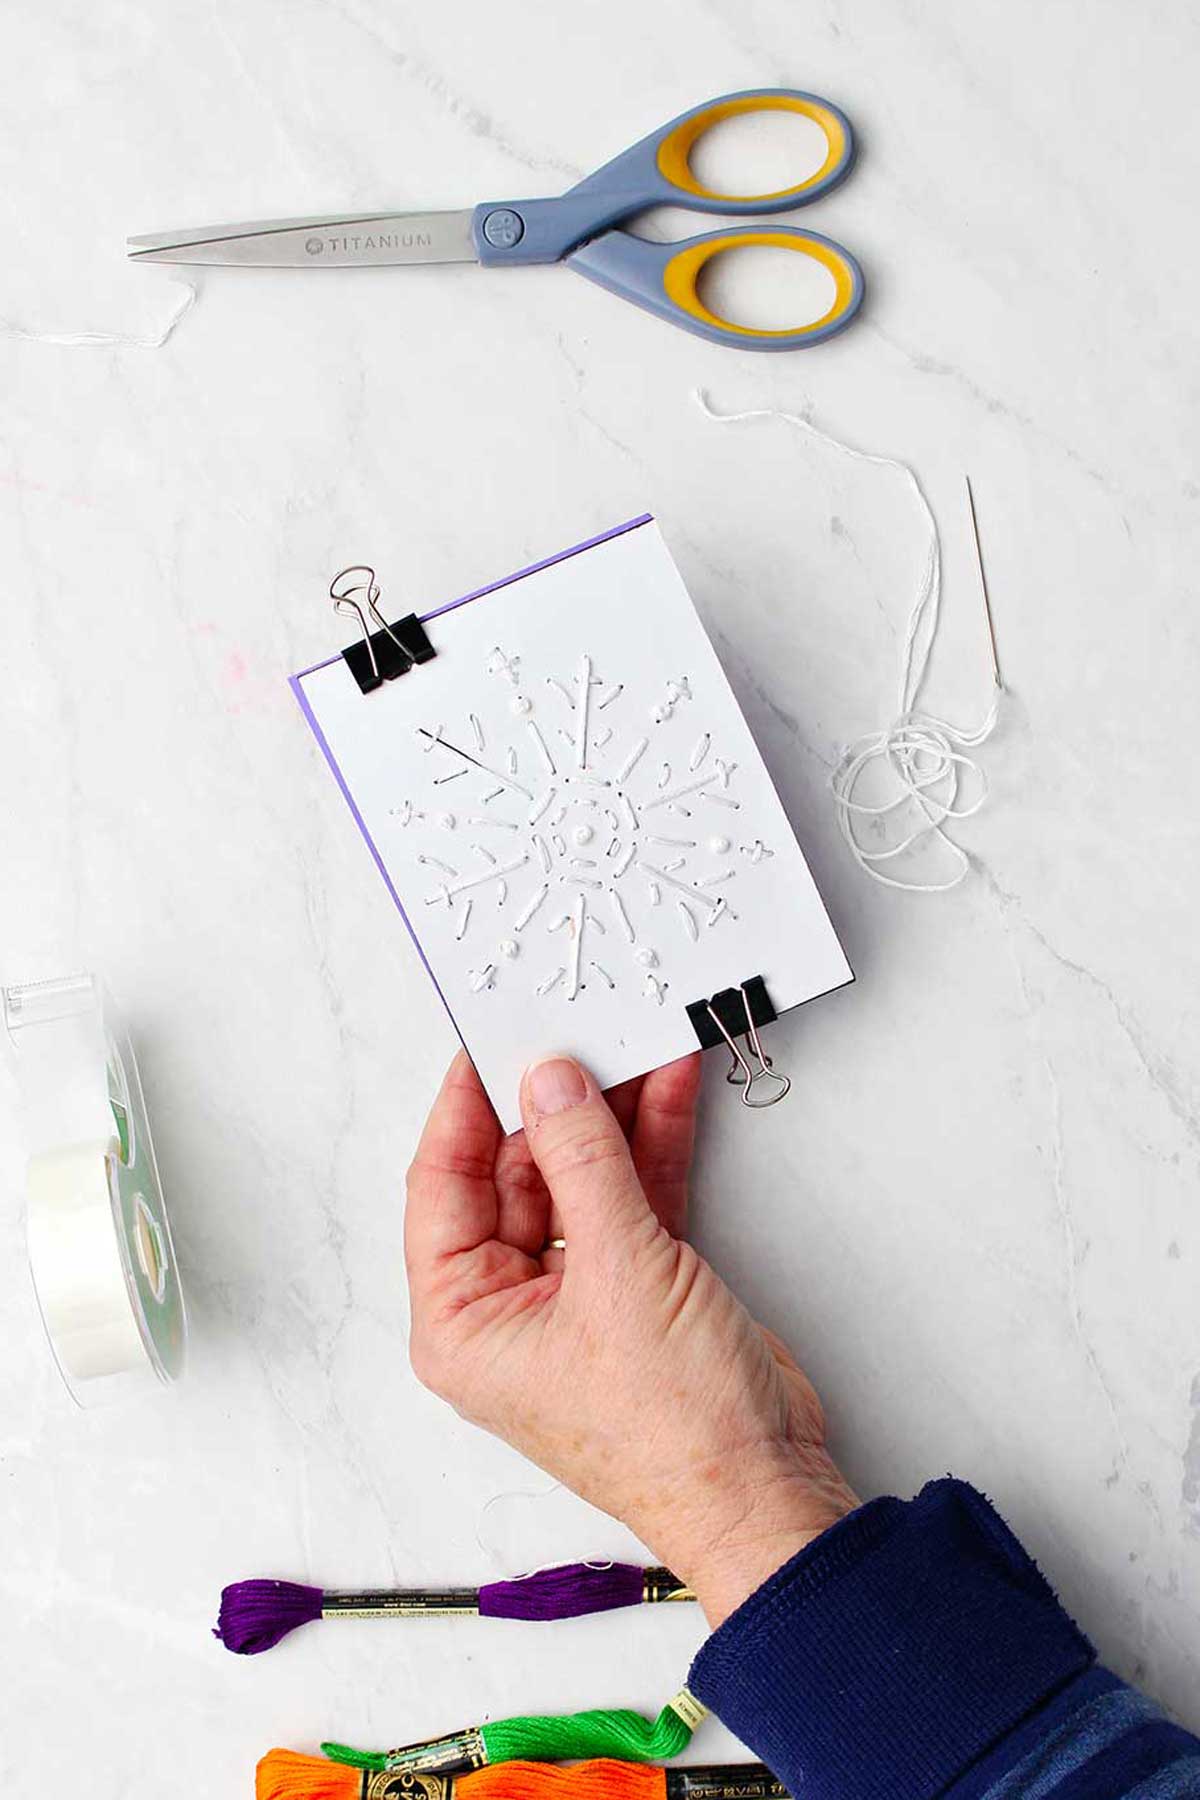 Hand holding embroidered snowflake paper clamped on purple card with embroidery floss, tape and scissors nearby.